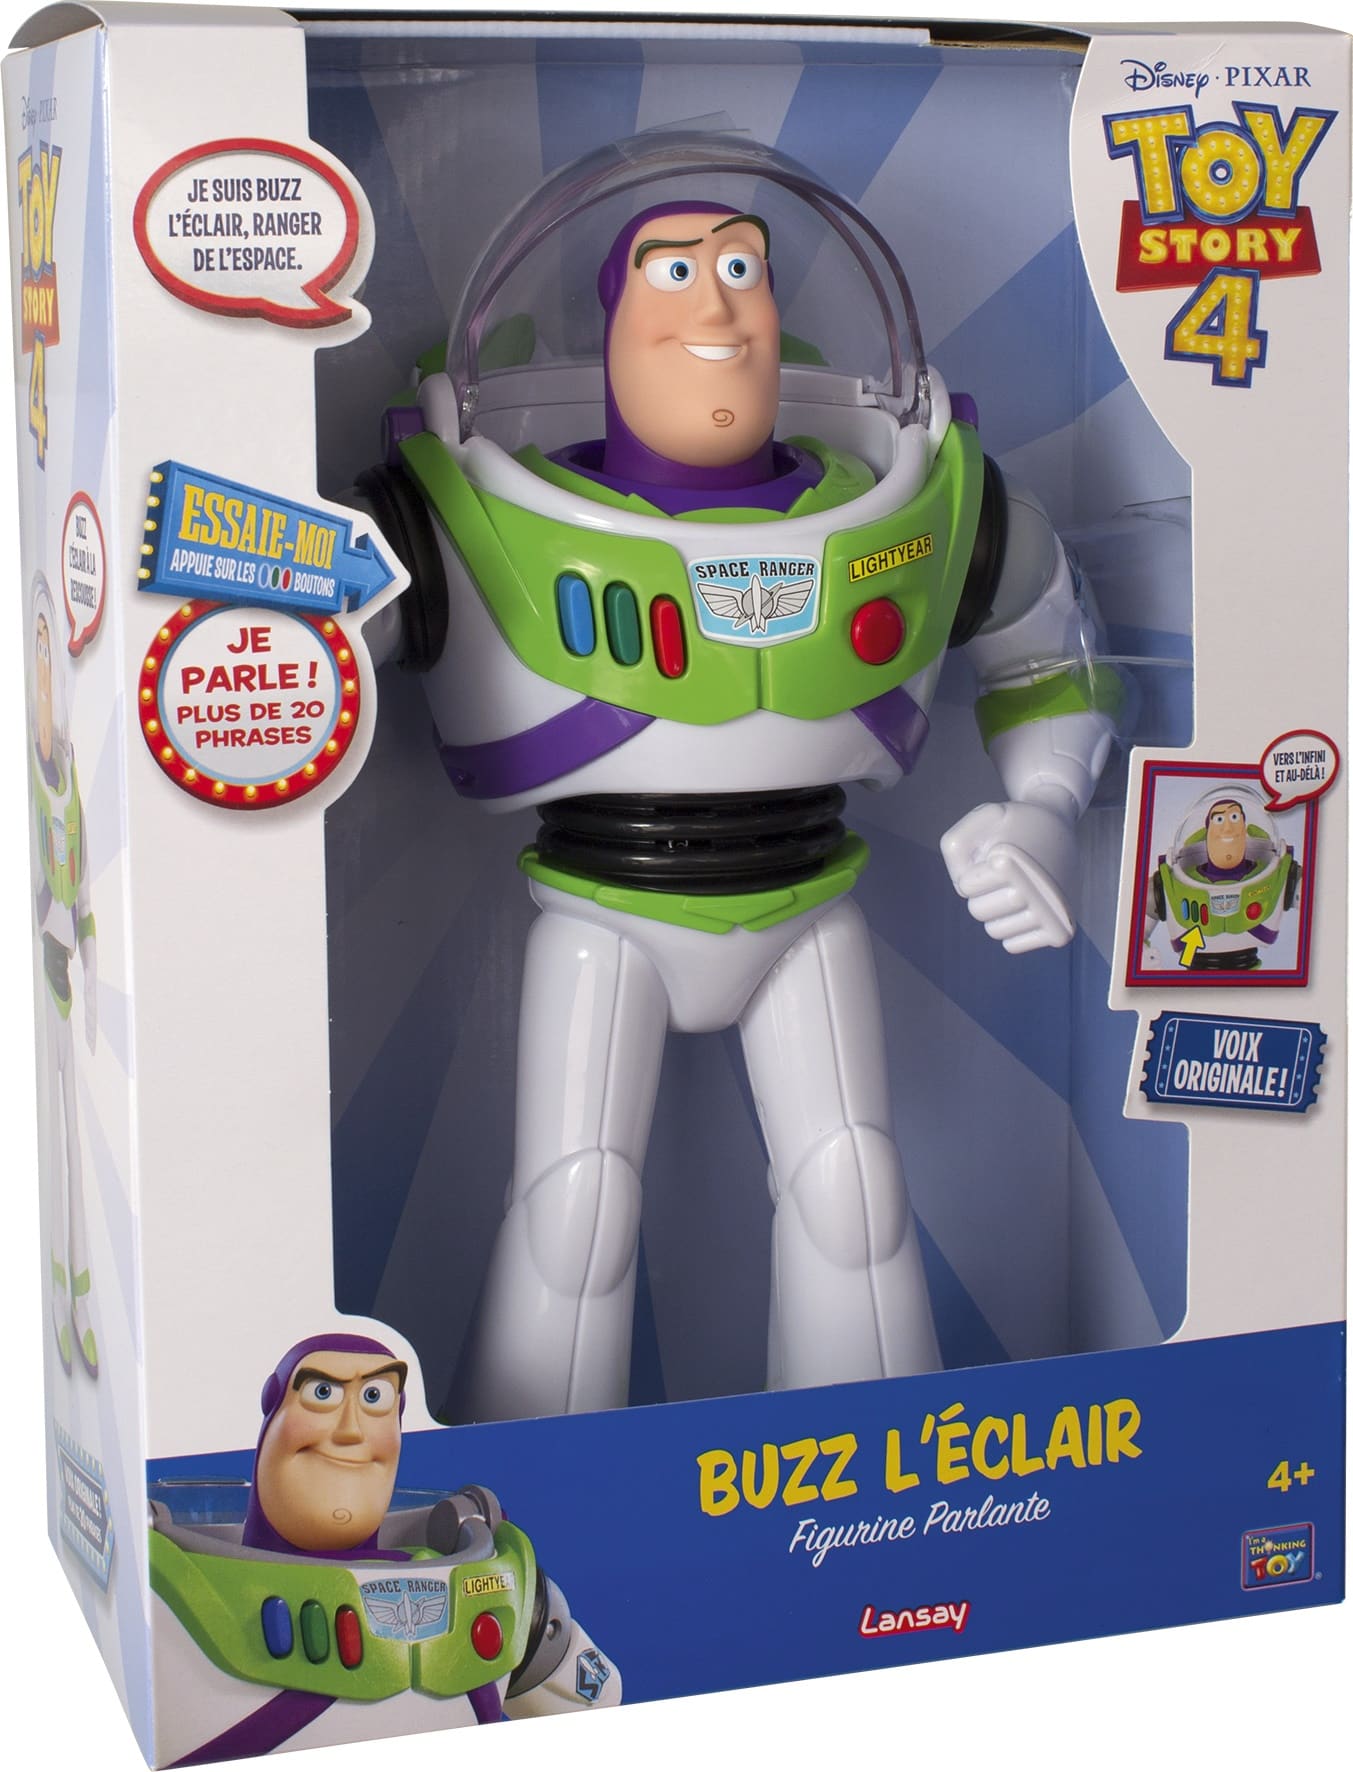 Toy story 4 buzz l'eclair parlant (fr)